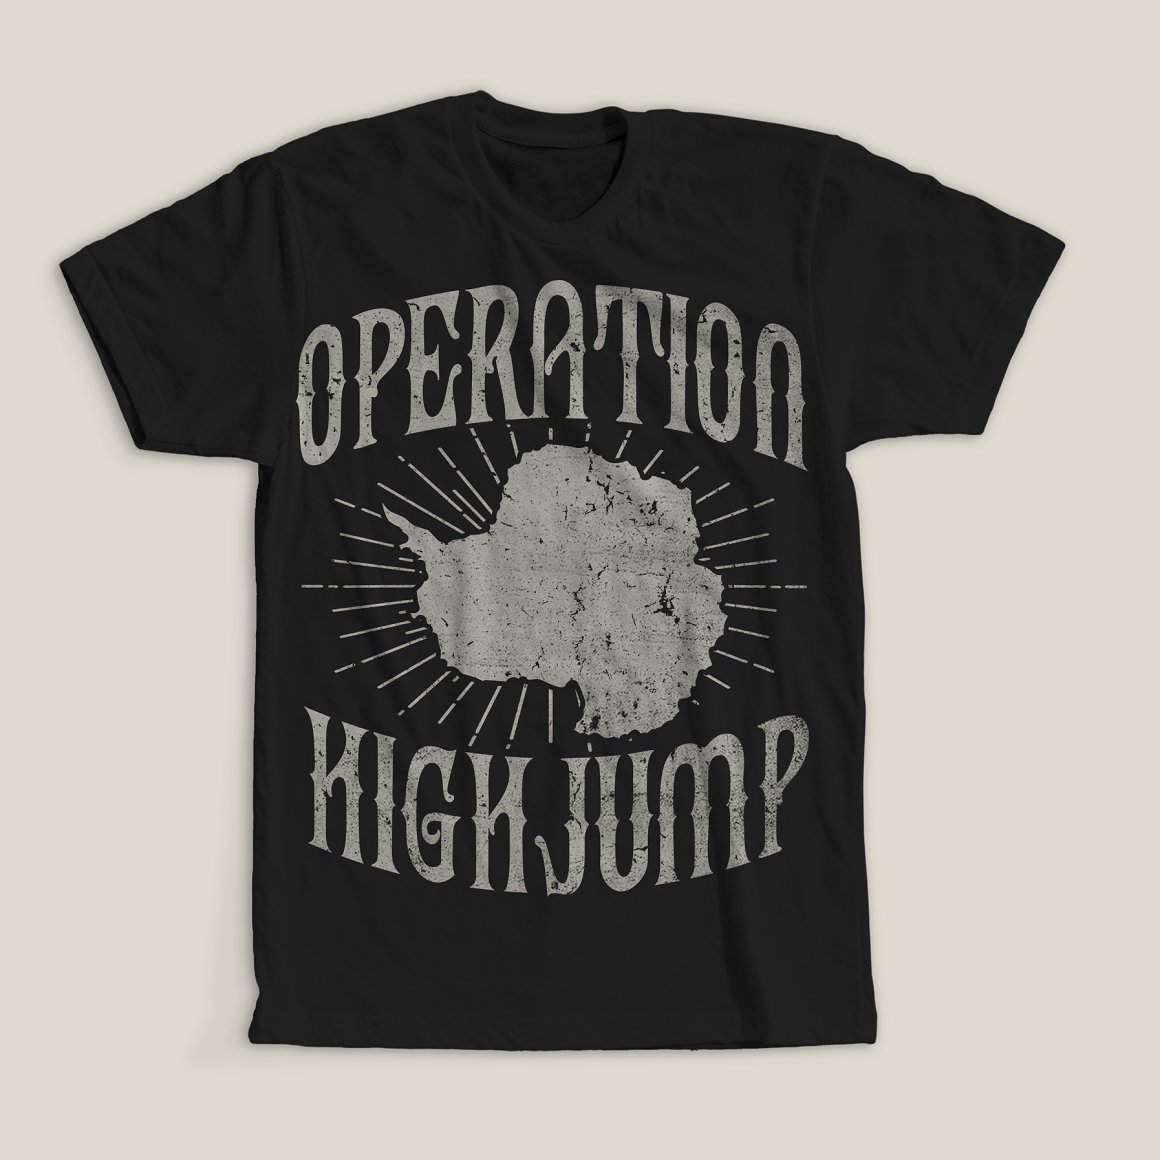 Retro vintage distressed design with the white lettering "Operation high jump" on black t-shirt.